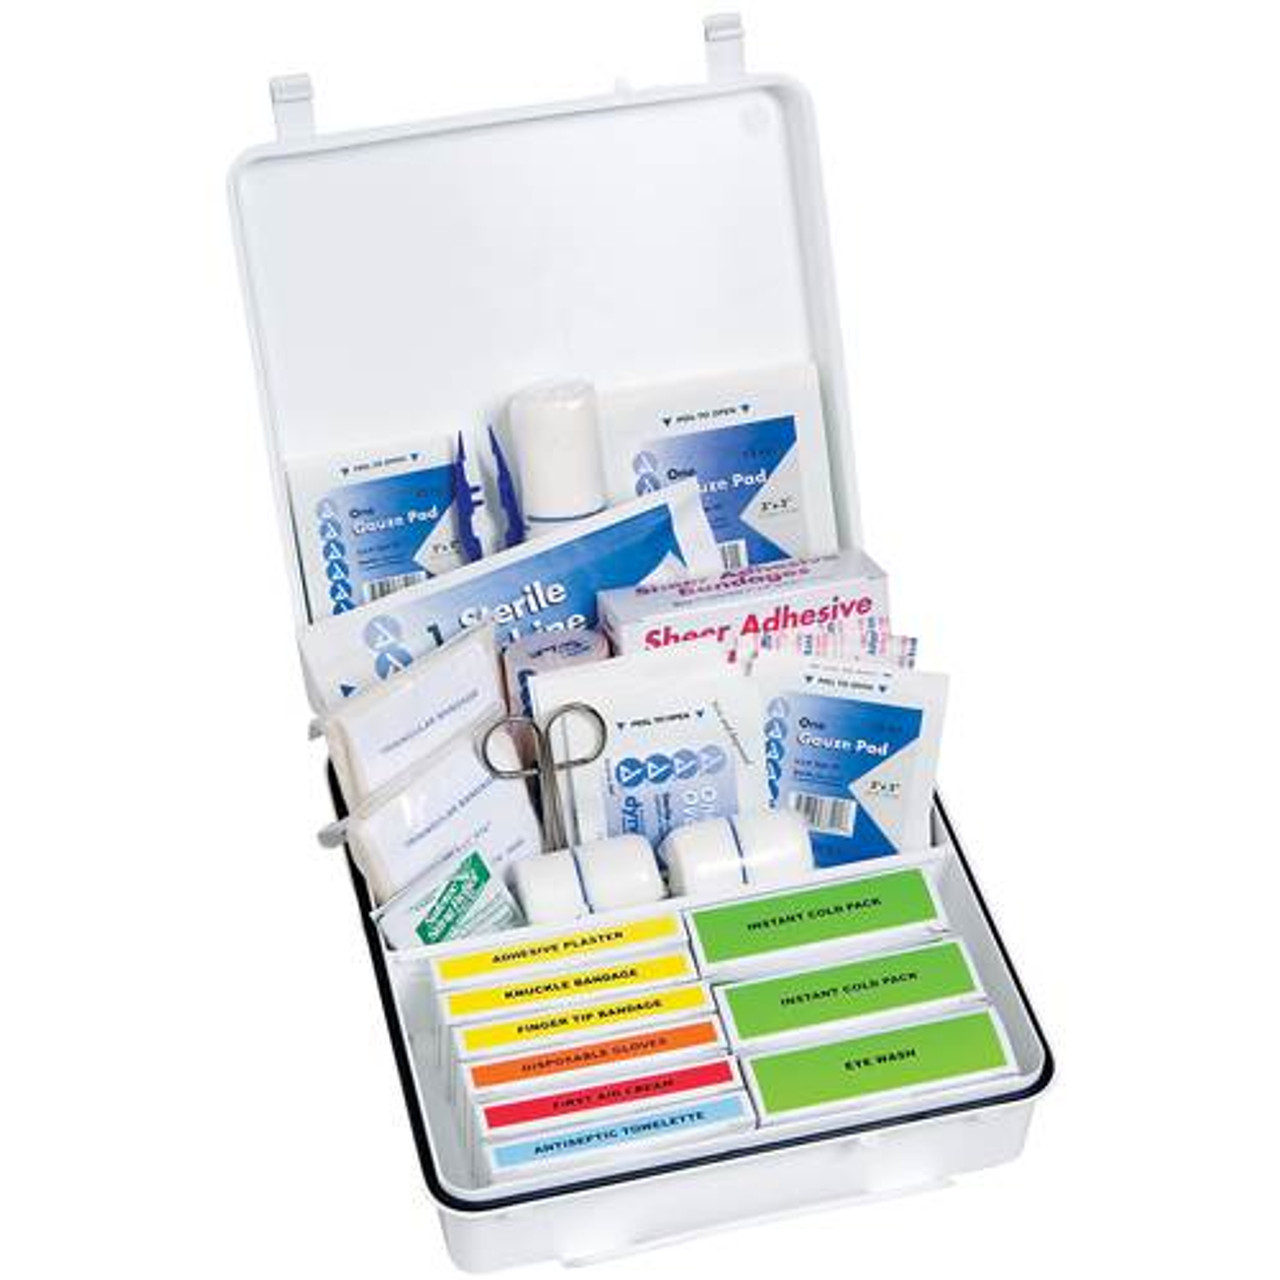 50 Person First Aid Kit